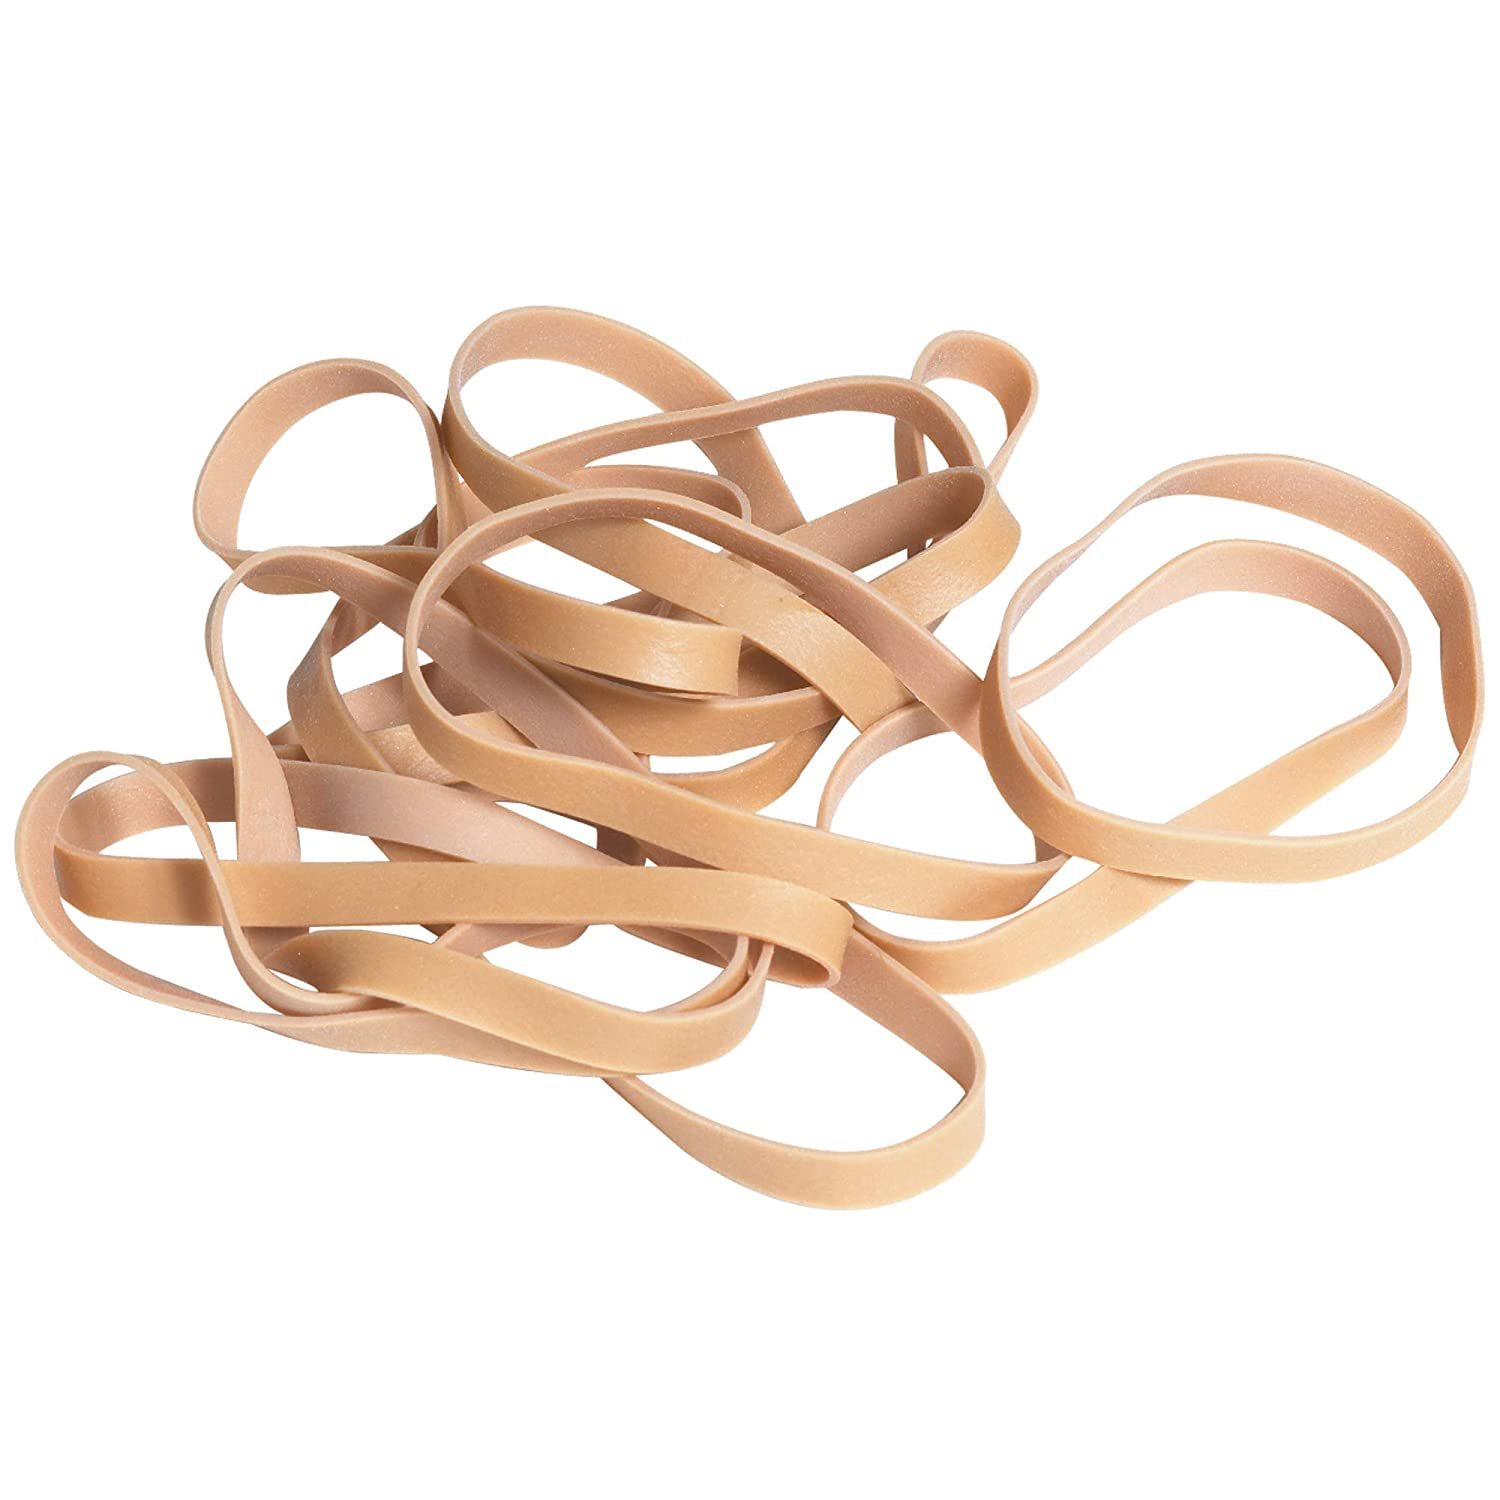 Primary image for Top Pack Supply Rubber Bands, Bulk, 1/4" x 3 1/2", Brown (Pack of 5 Lbs)